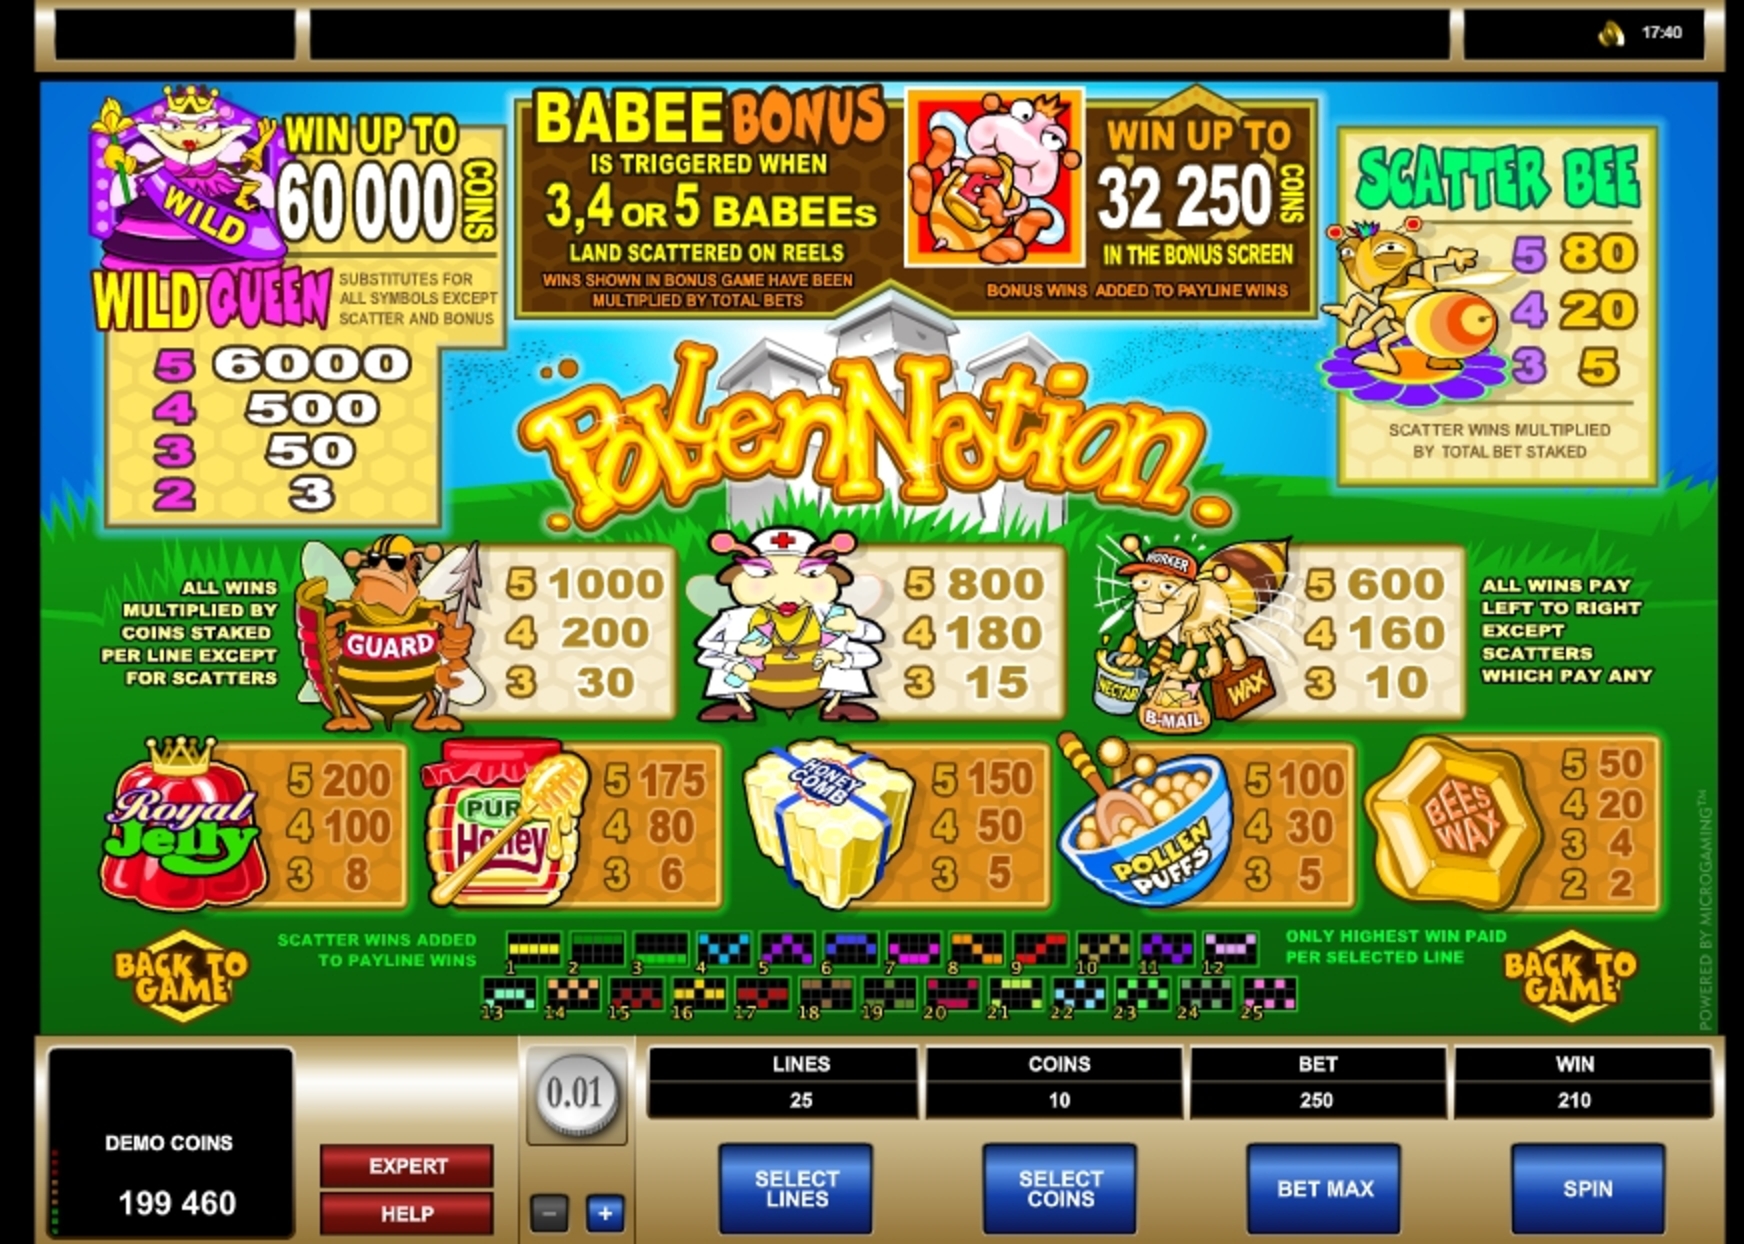 Info of Pollen Nation Slot Game by Microgaming